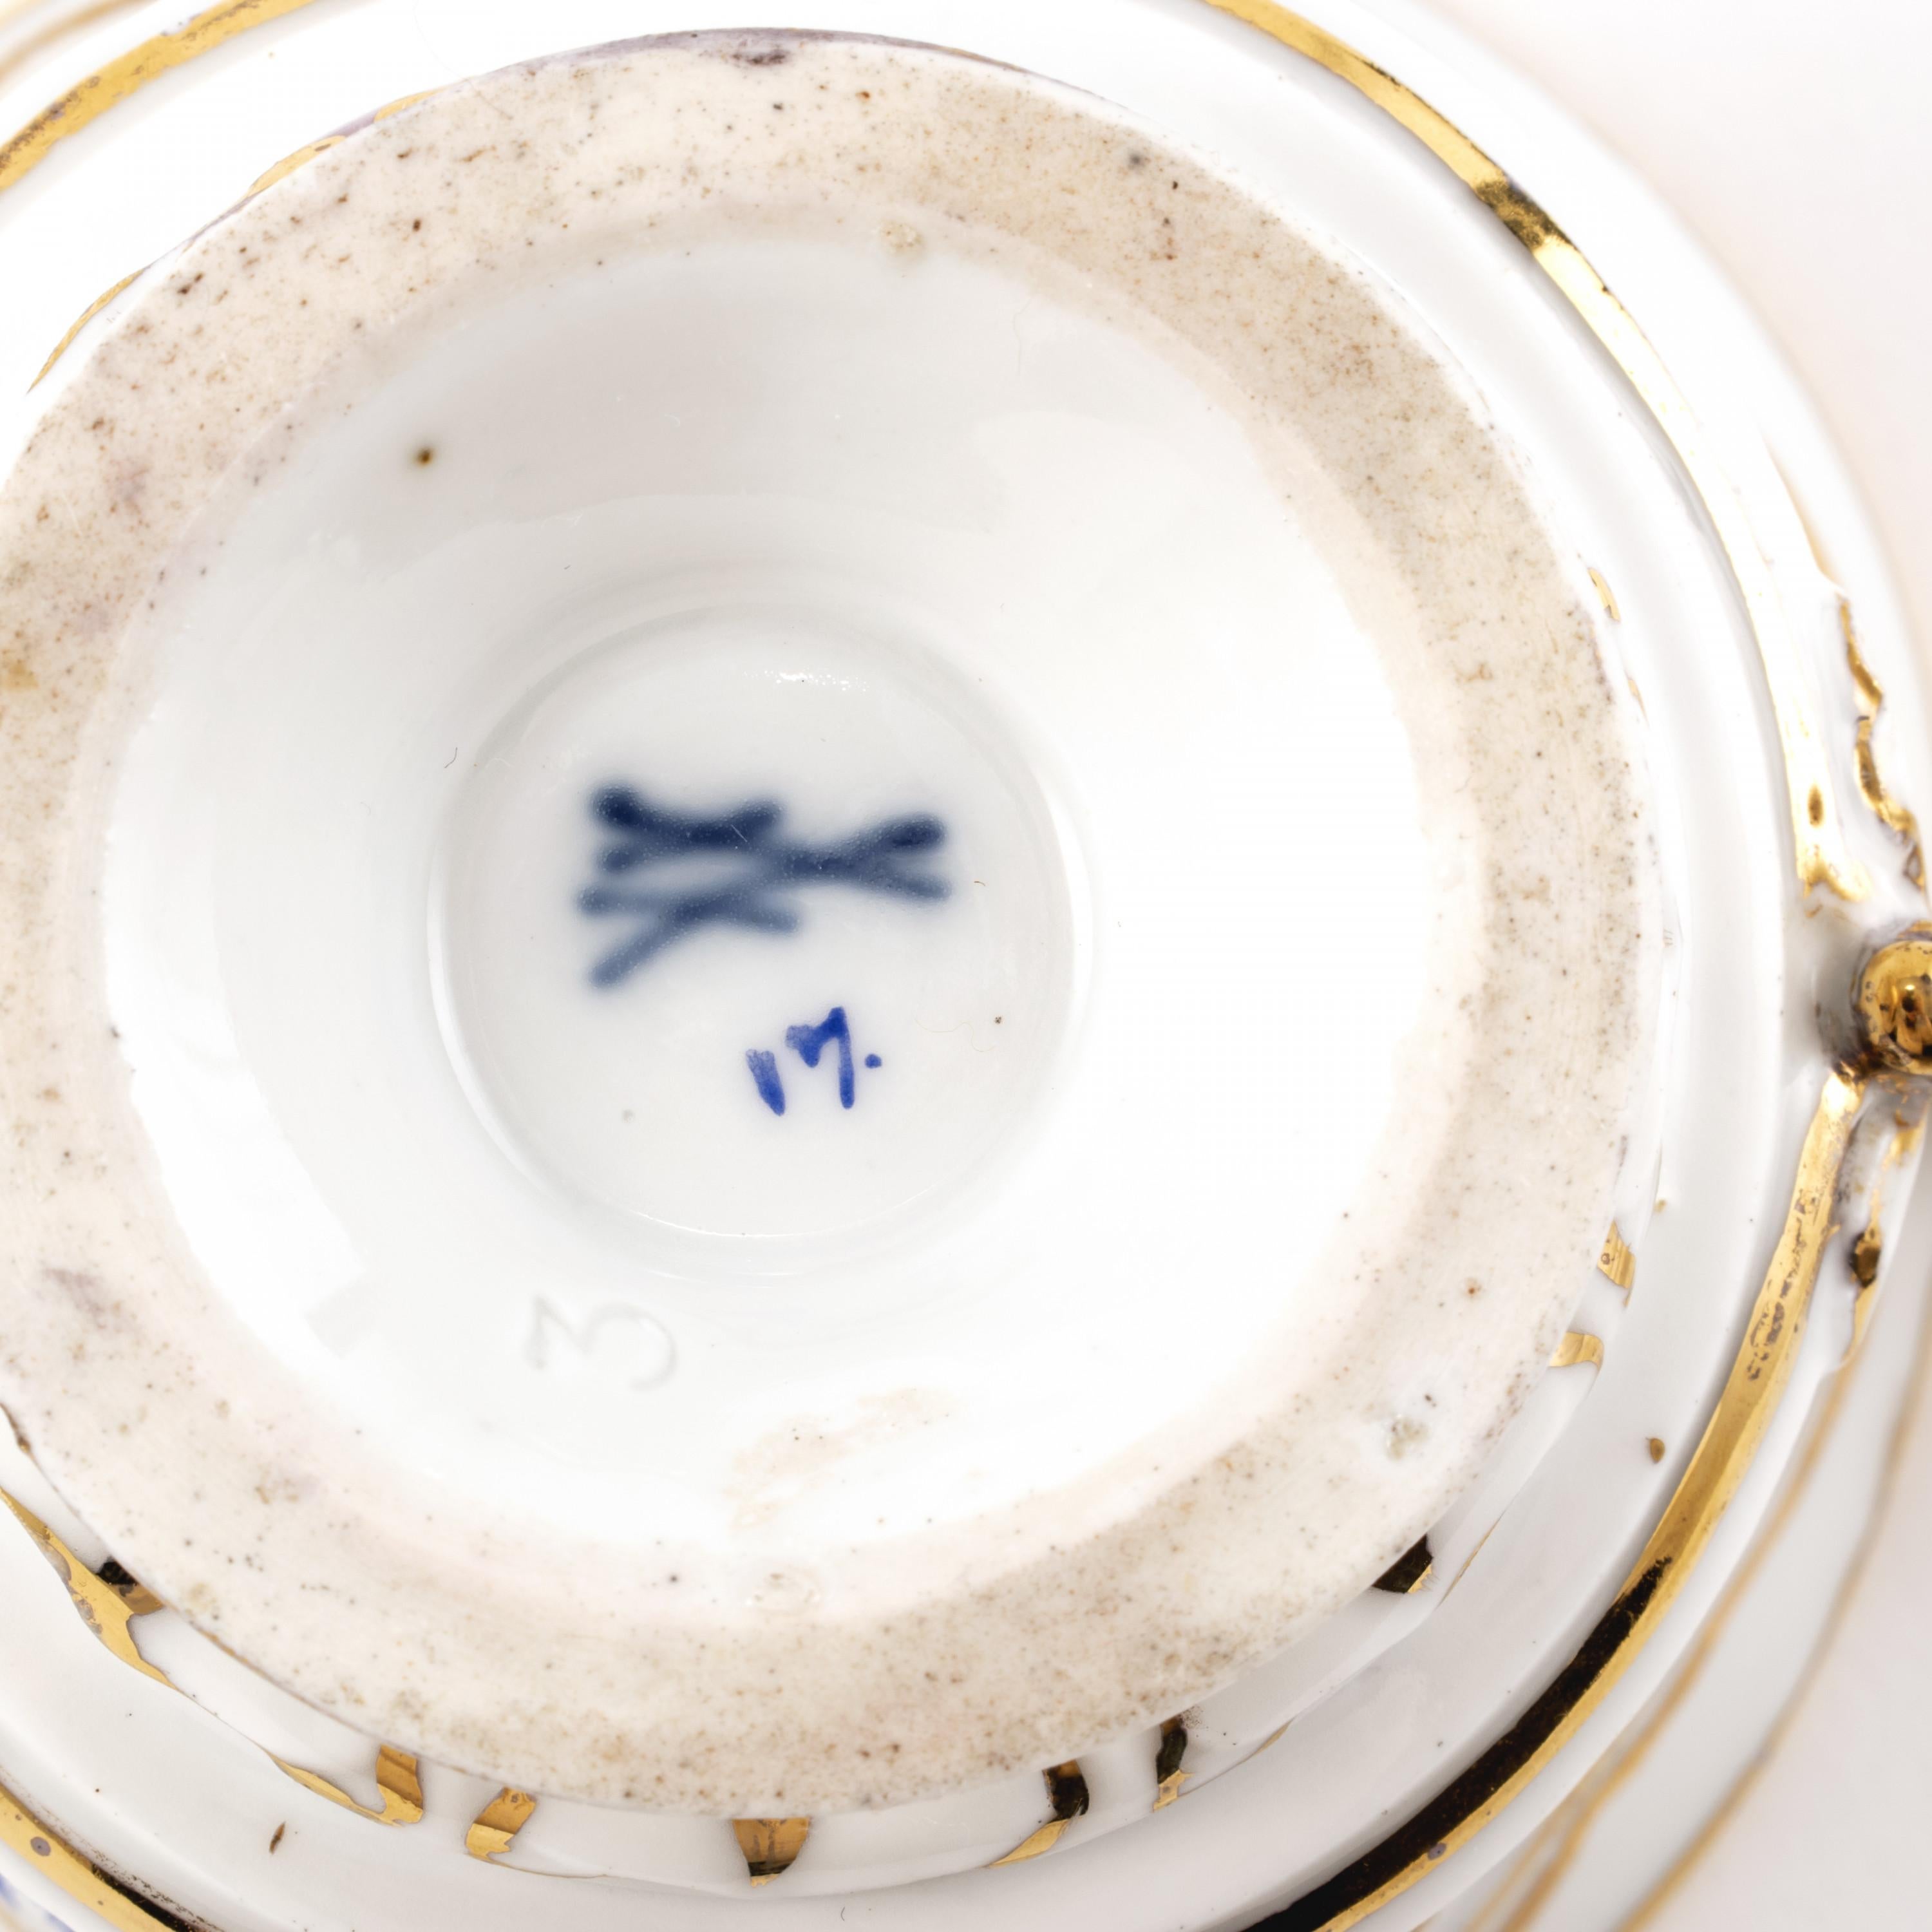 19th Century Meissen Porcelain Cup and Saucer